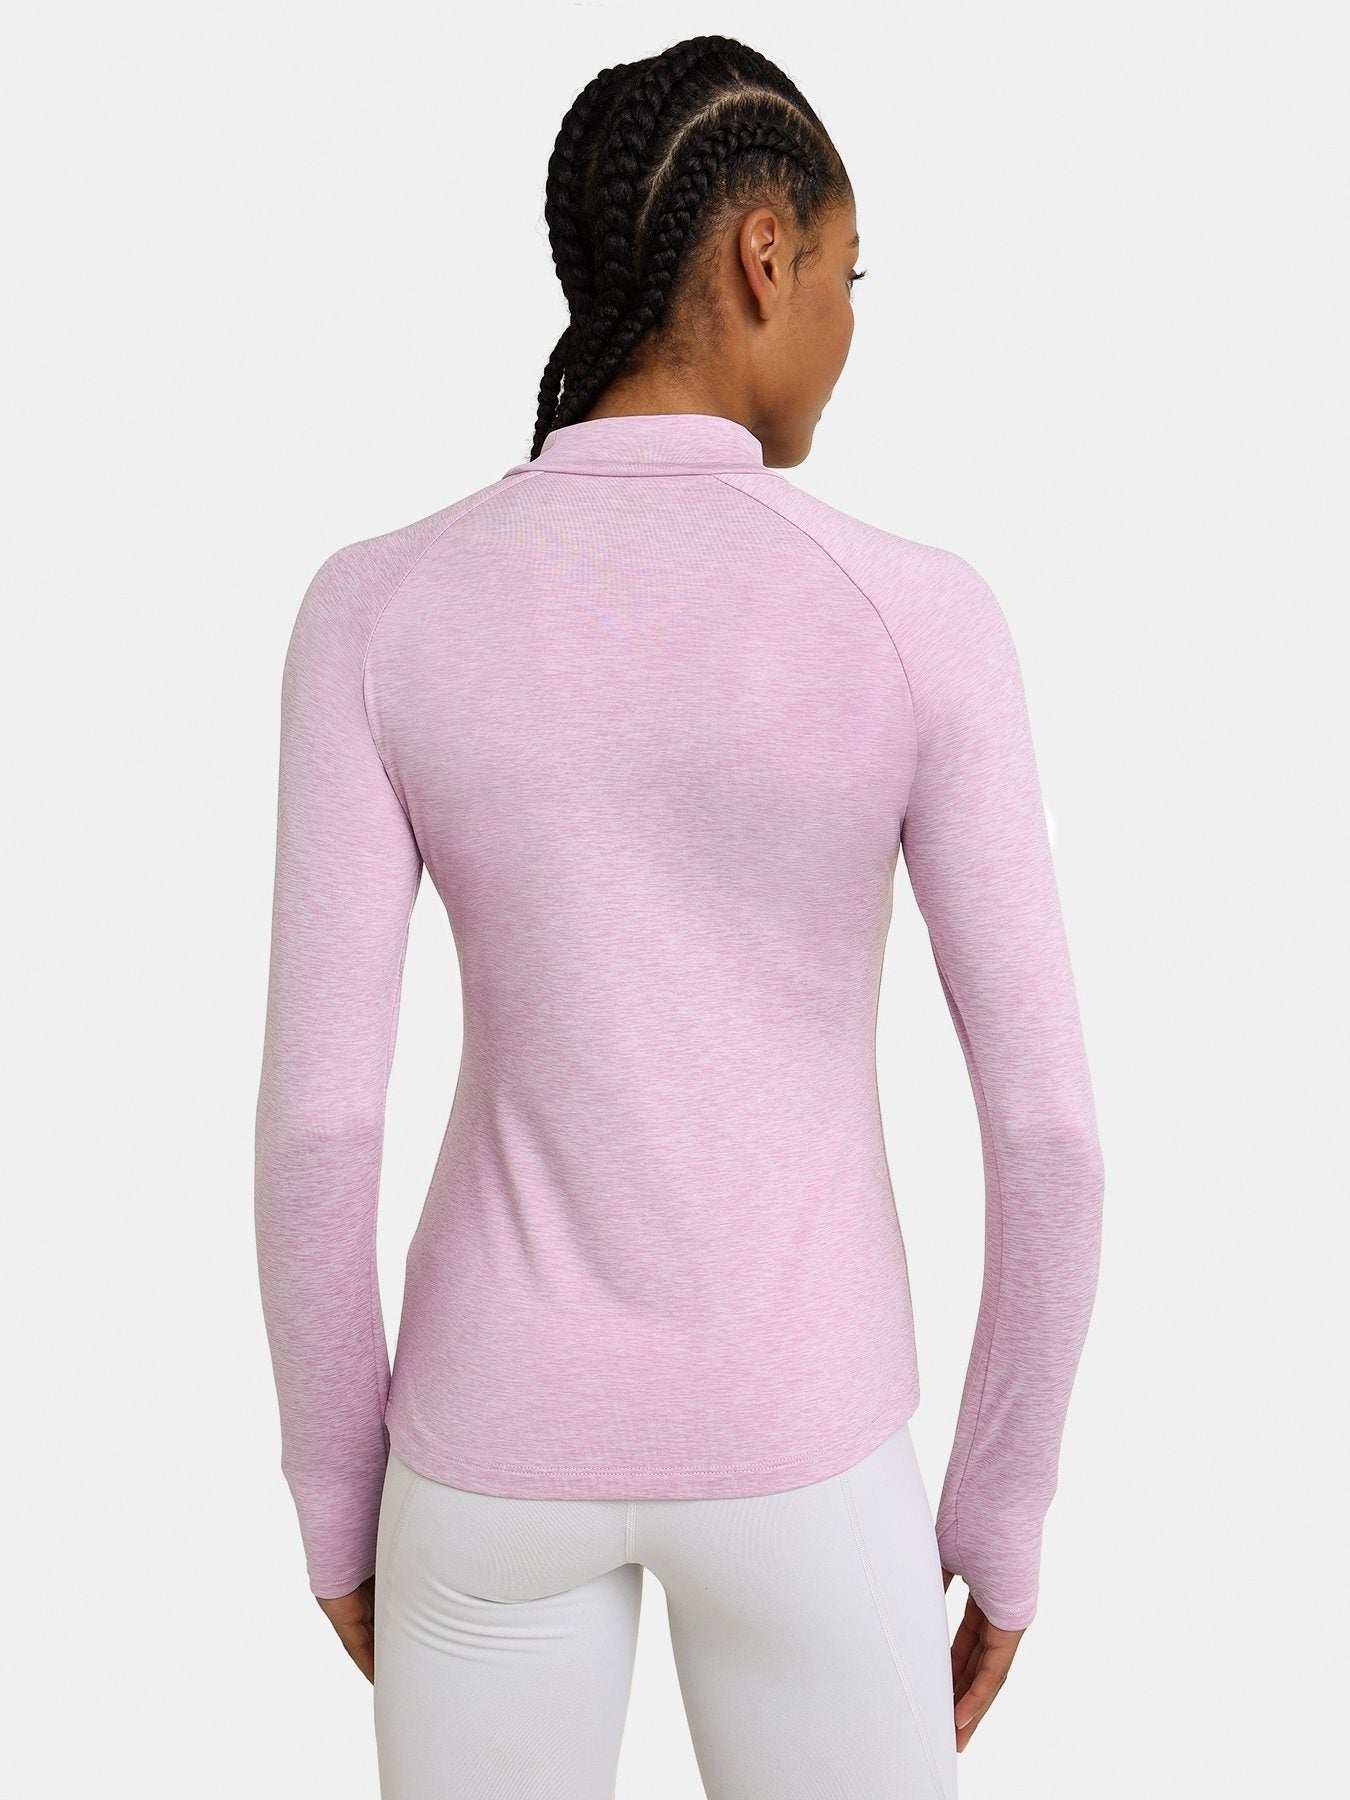 Bliss SuperThermal Long Sleeve Running Mock Neck Top For Women With Thumbholes & Brushed Inner Fabric